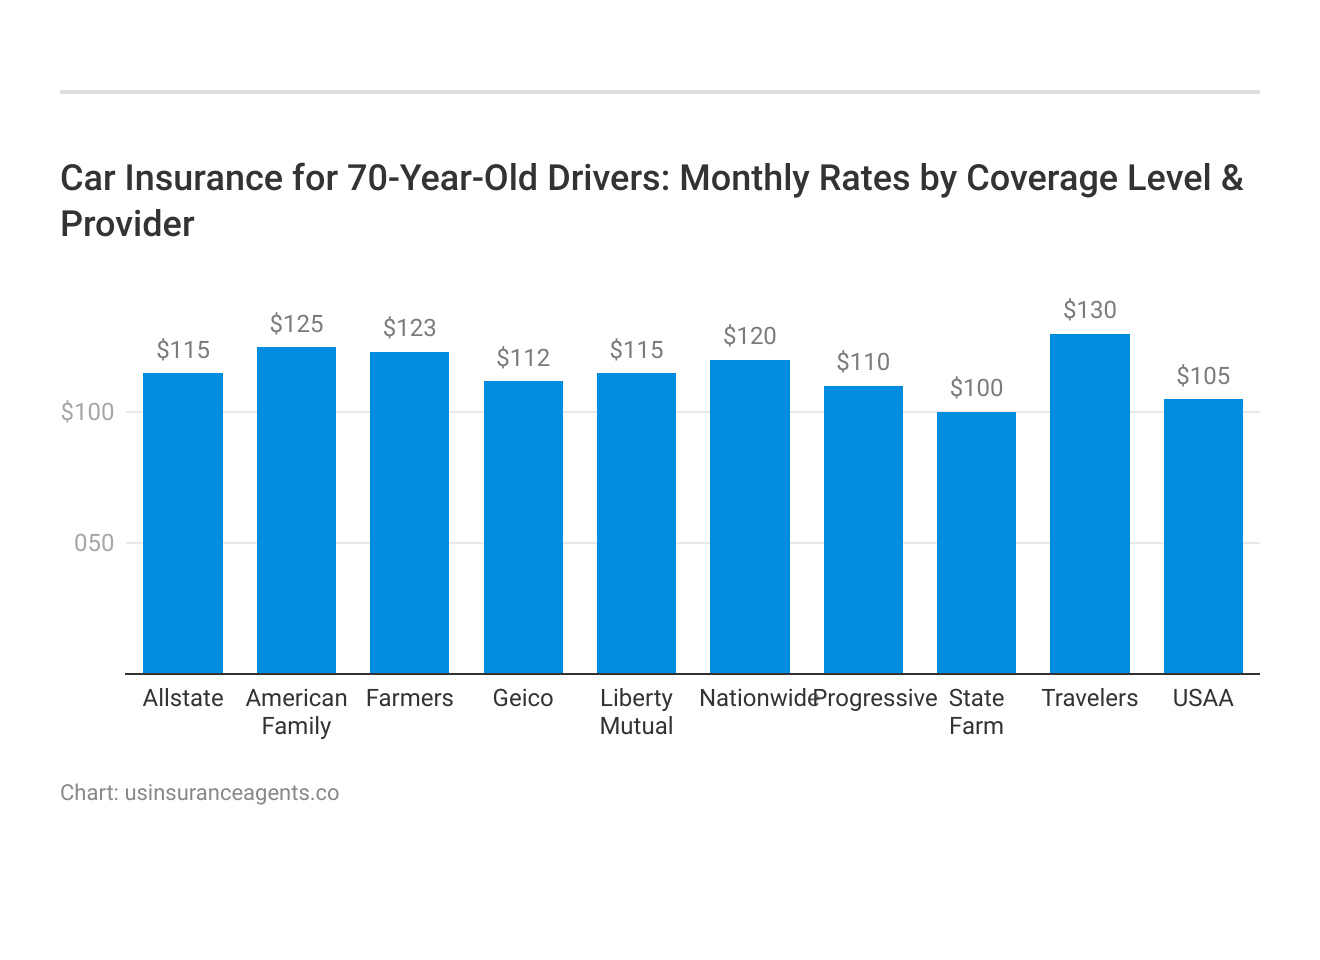 <h3>Car Insurance for 70-Year-Old Drivers: Monthly Rates by Coverage Level & Provider</h3>